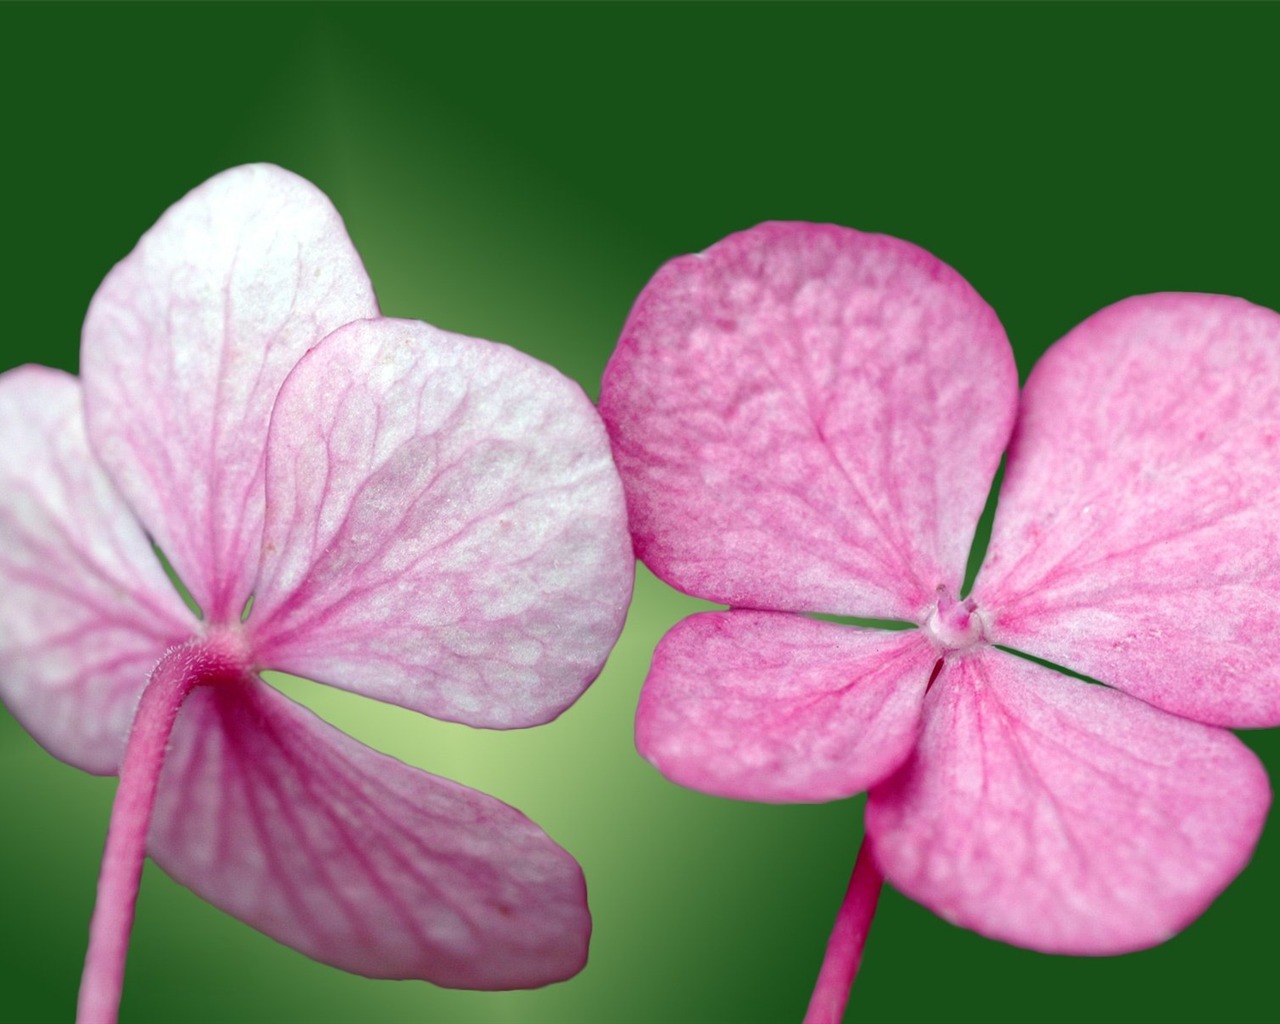 Pairs of flowers and green leaves wallpaper (1) #1 - 1280x1024